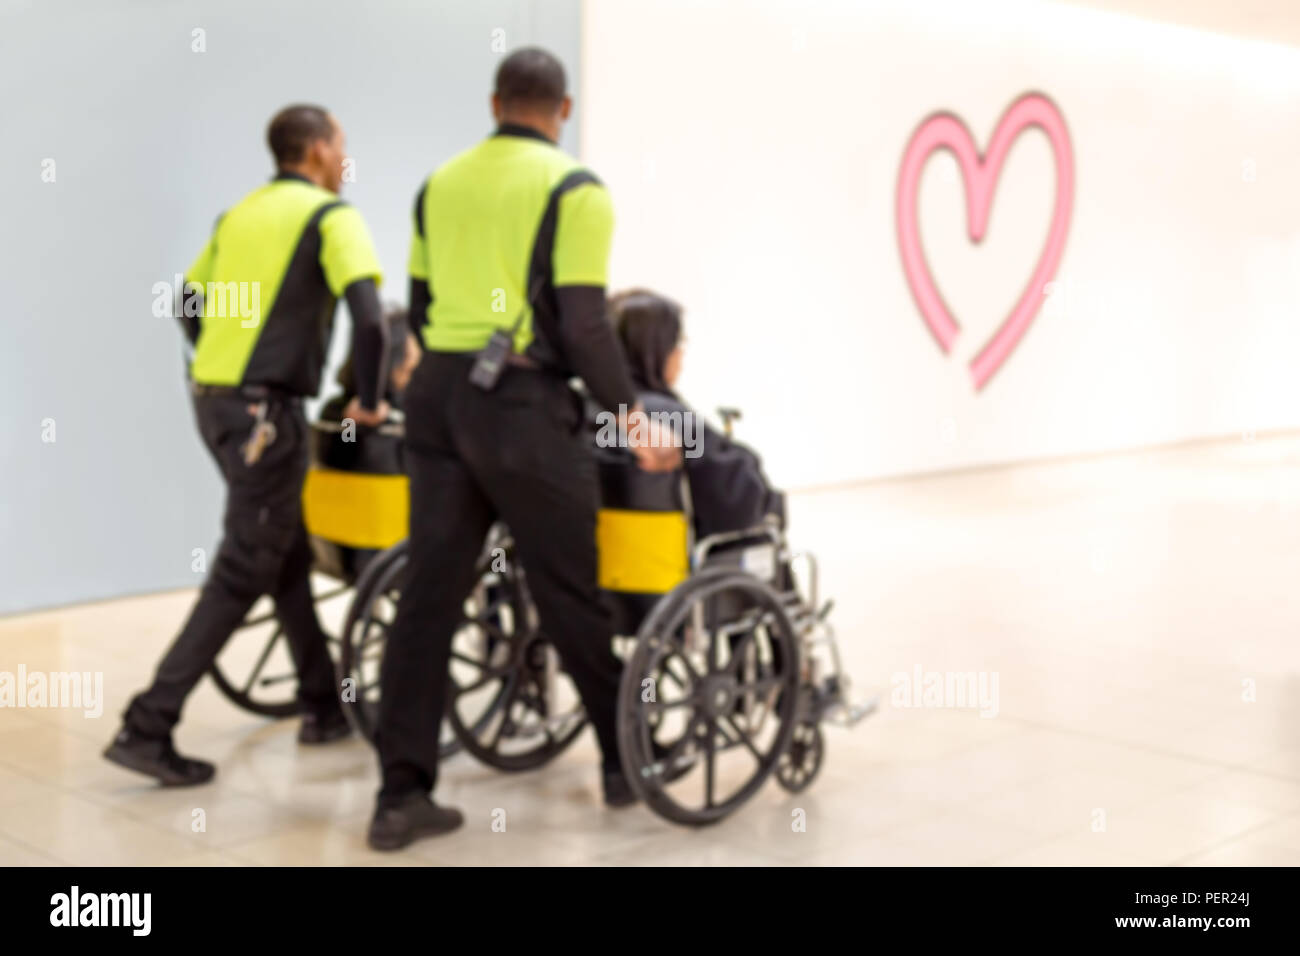 Blurred concept caretaker pushing elderly people in wheelchair in the airport. Stock Photo